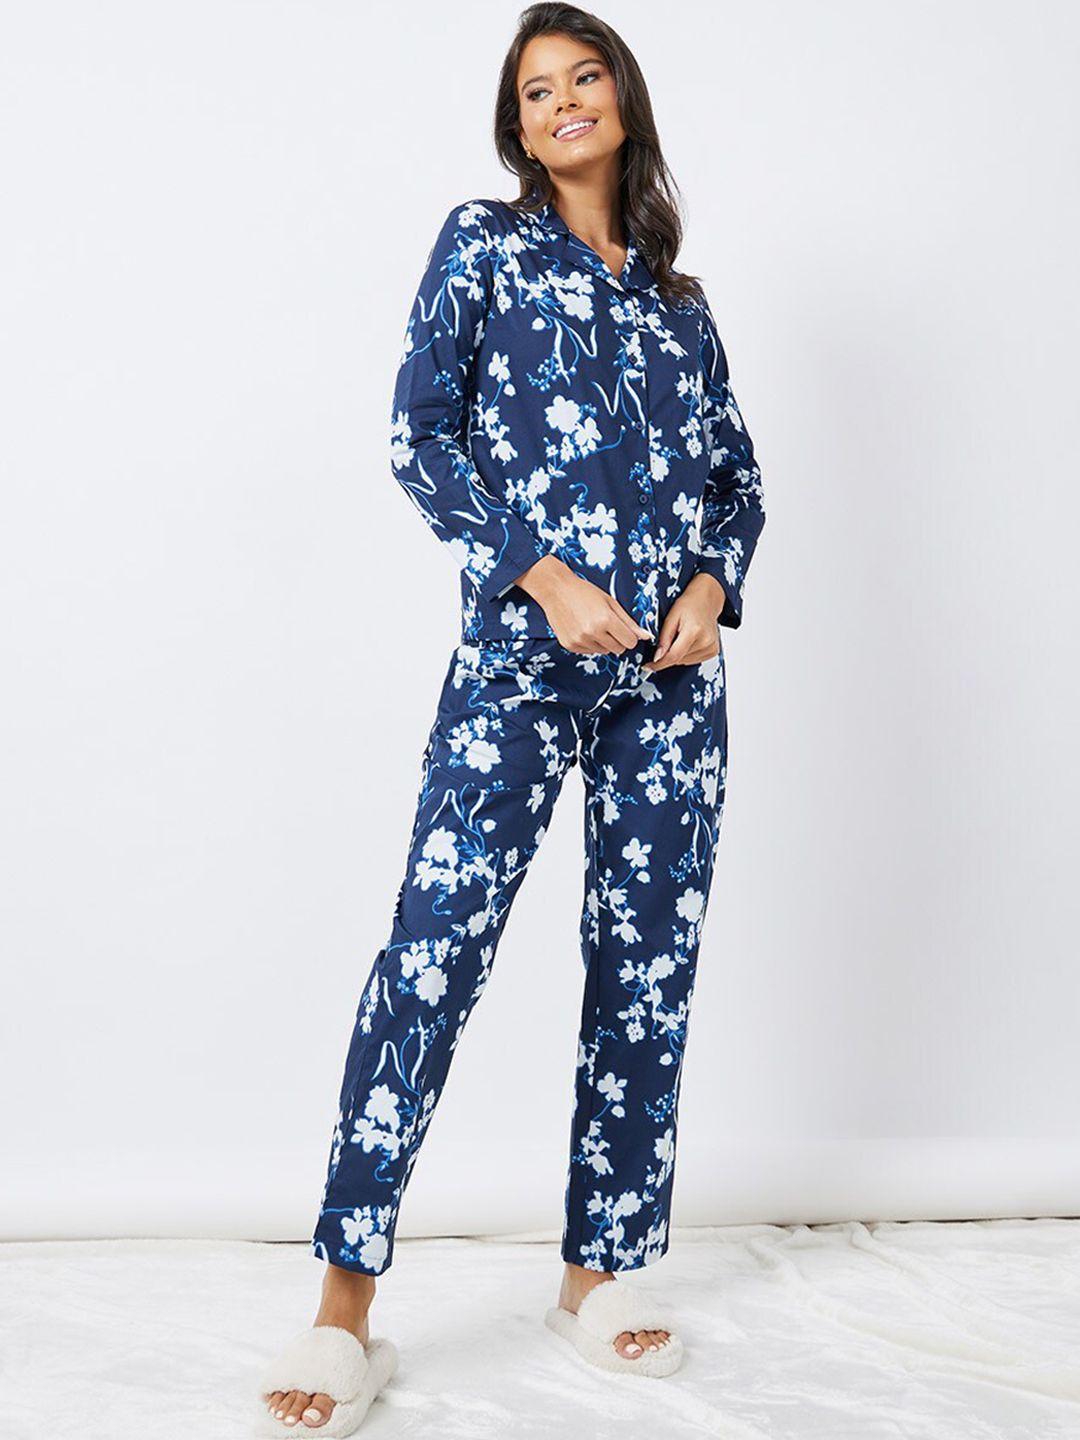 styli navy blue & white floral printed cotton shirt and pyjama night suit